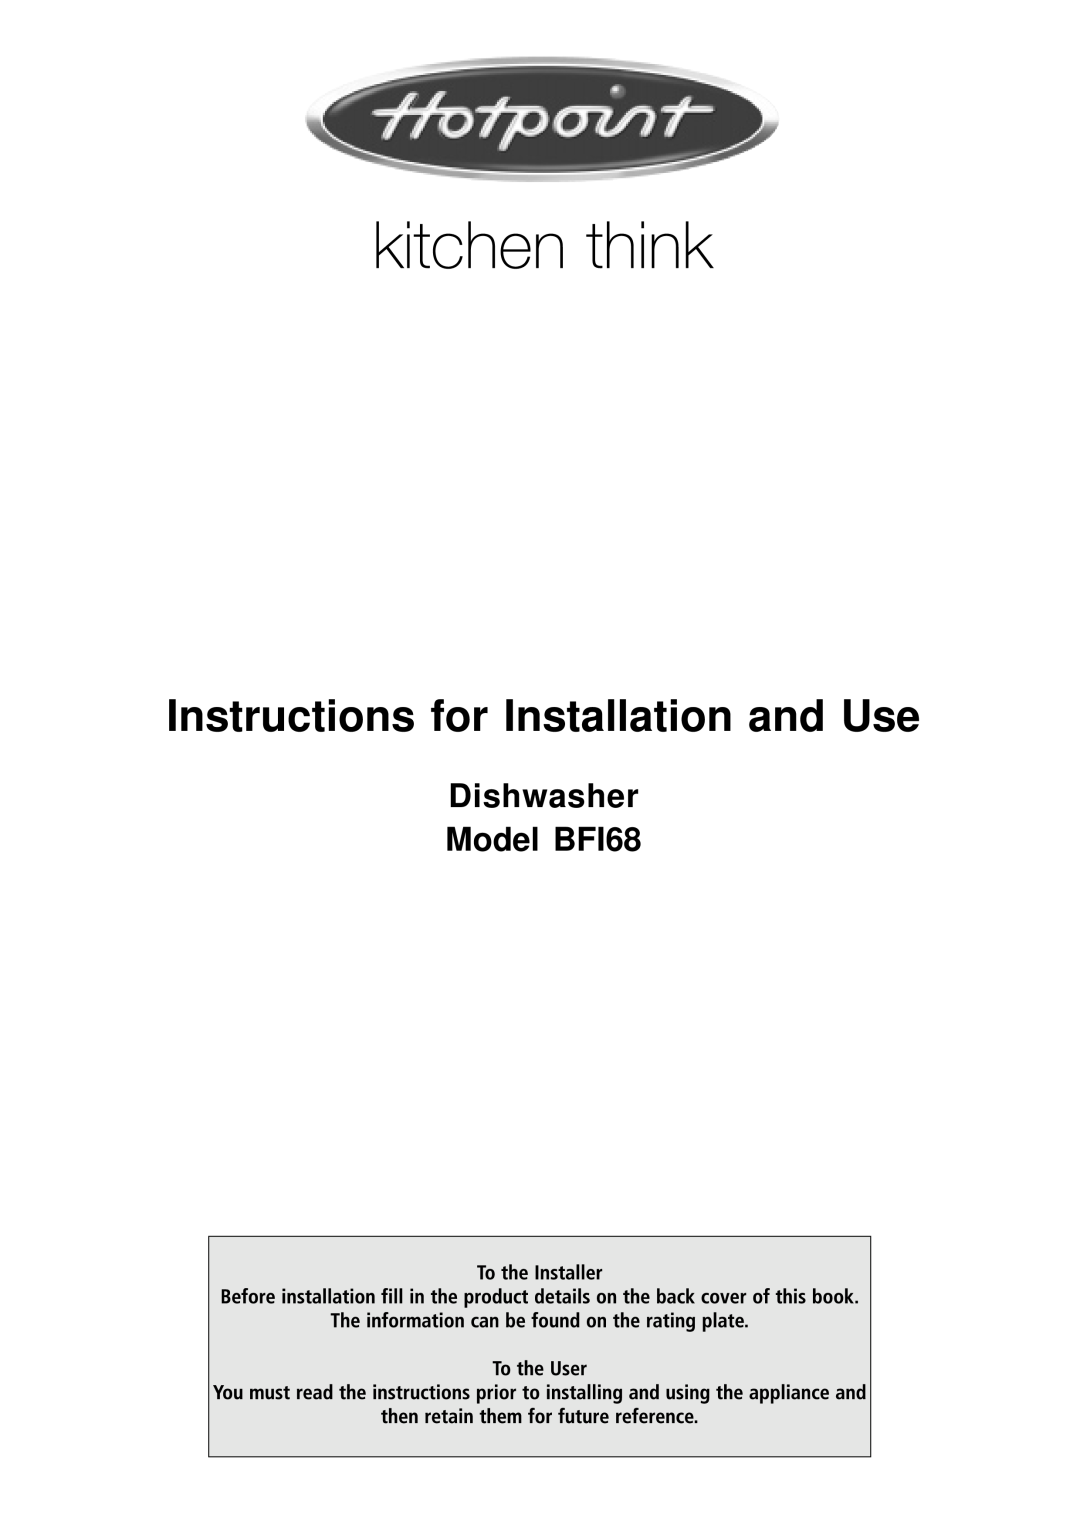 Hotpoint manual Instructions for Installation and Use, Dishwasher Model BFI68 